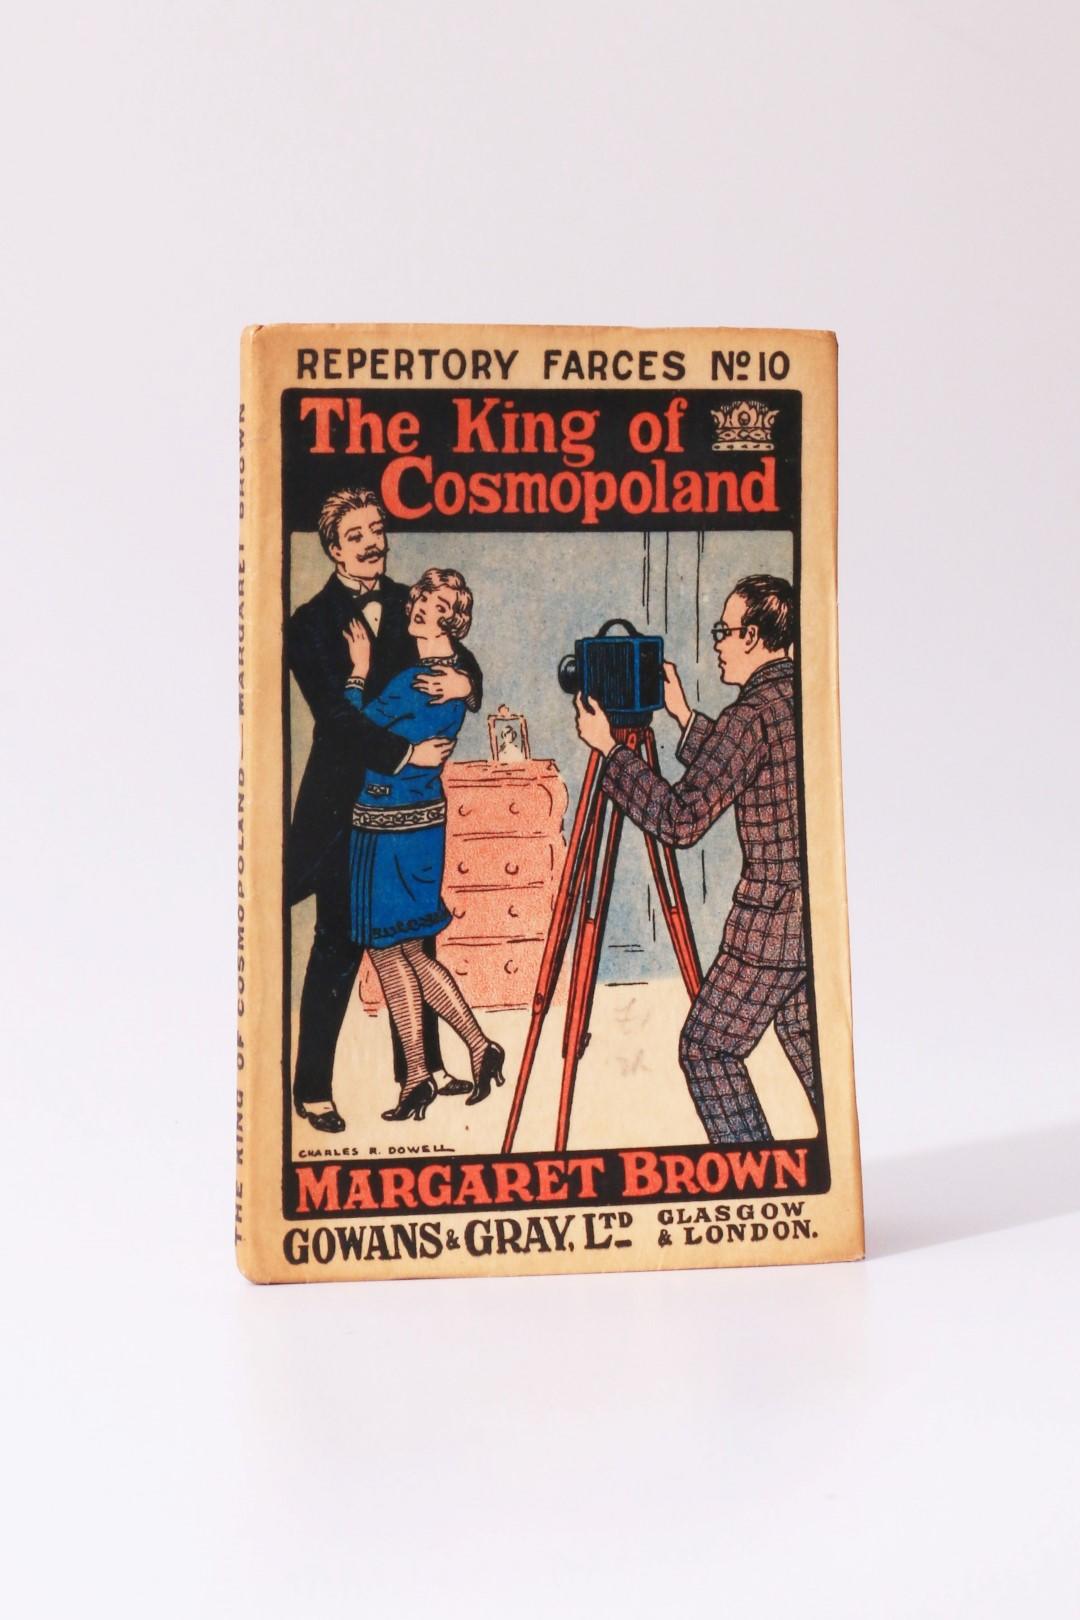 Margaret Brown - The King of Cosmopoland - Gowans & Gray Ltd, 1929, First Edition.